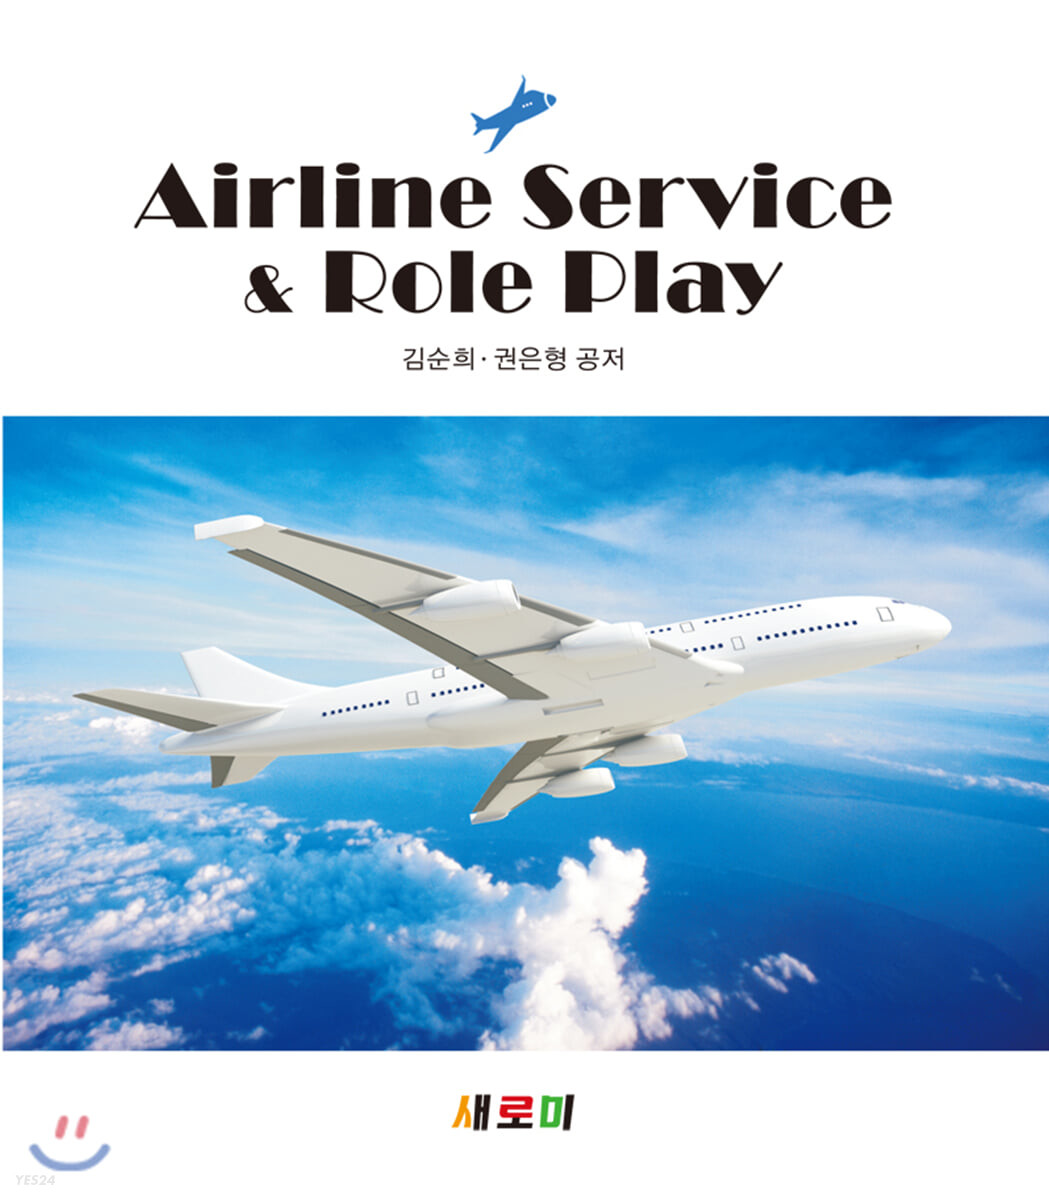 Airline service & role-play